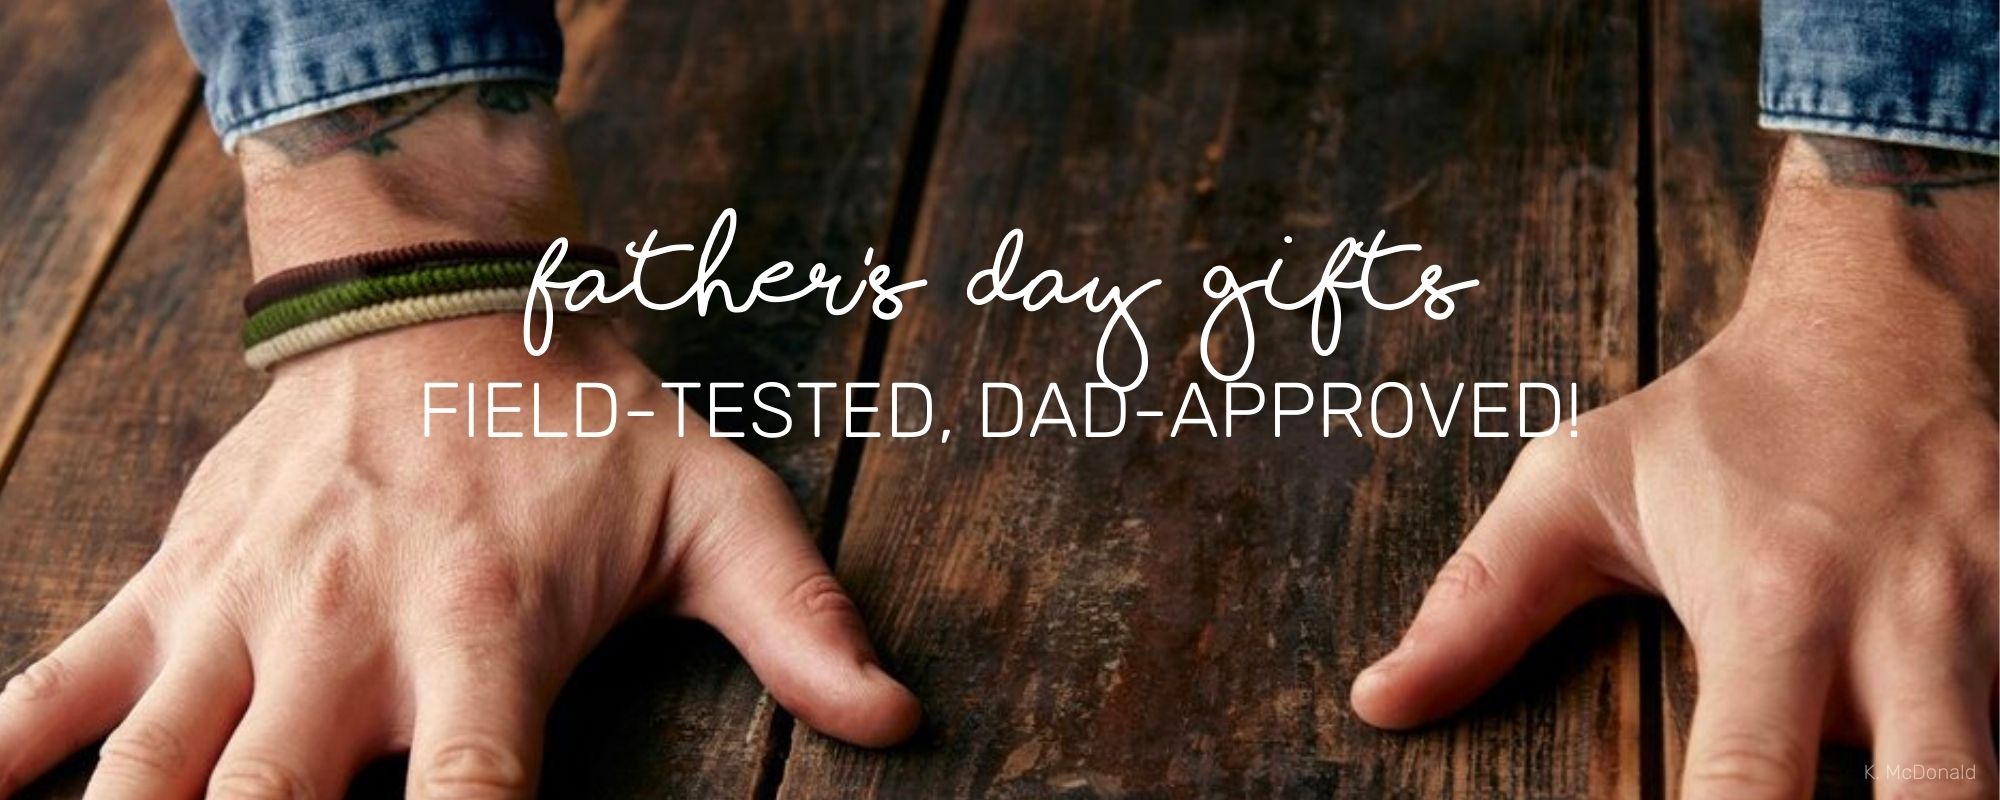 FATHER’S DAY GIFTS: FIELD-TESTED, DAD-APPROVED!